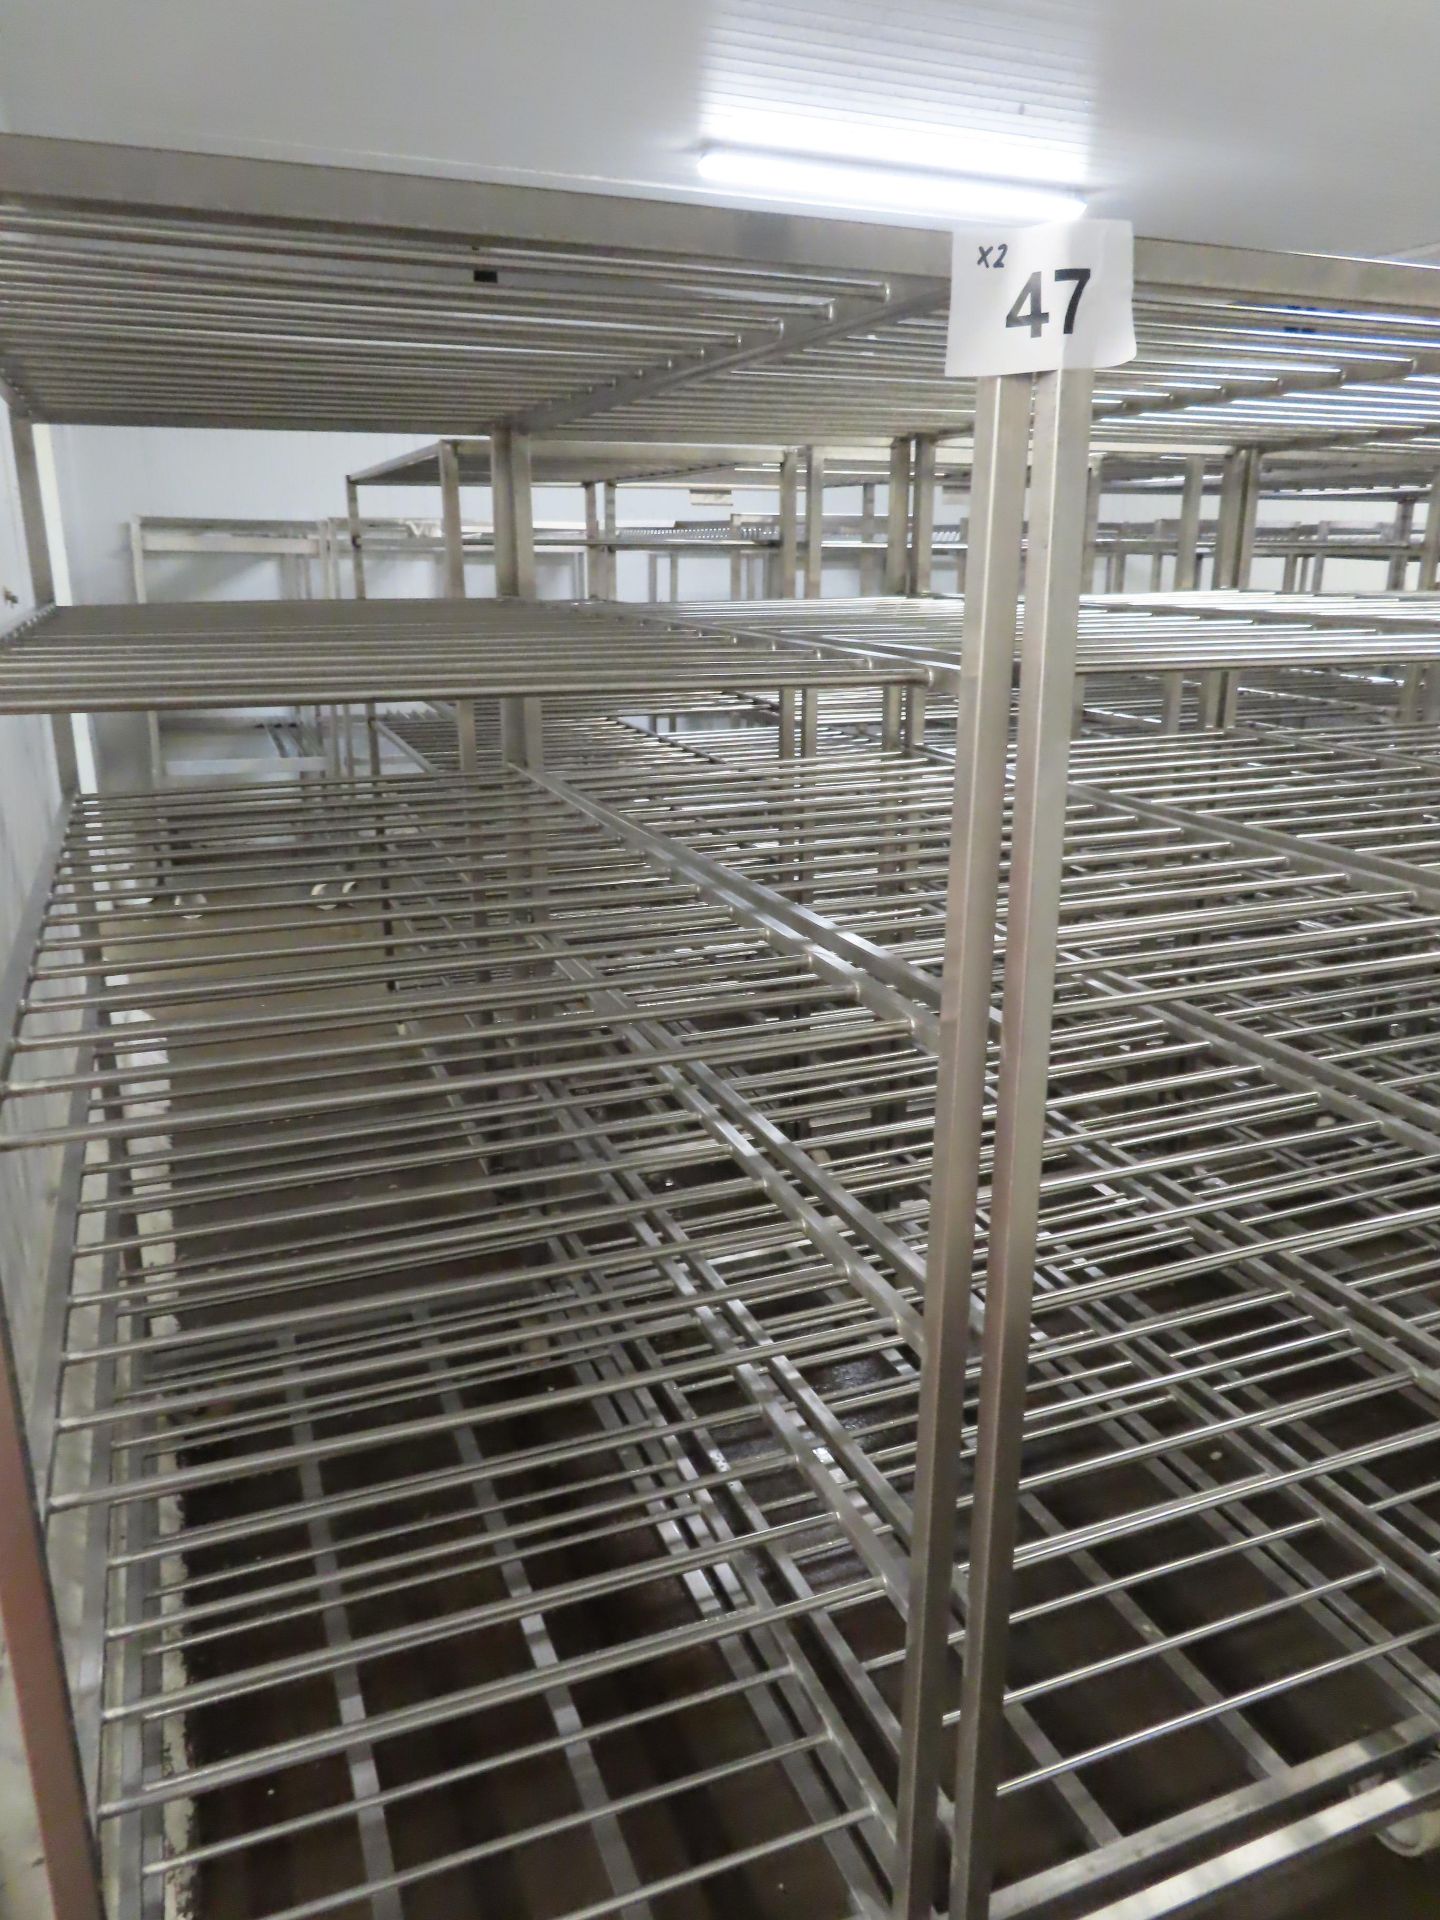 2 X S/S RACKS WITH 5-SHELVES. - Image 2 of 2